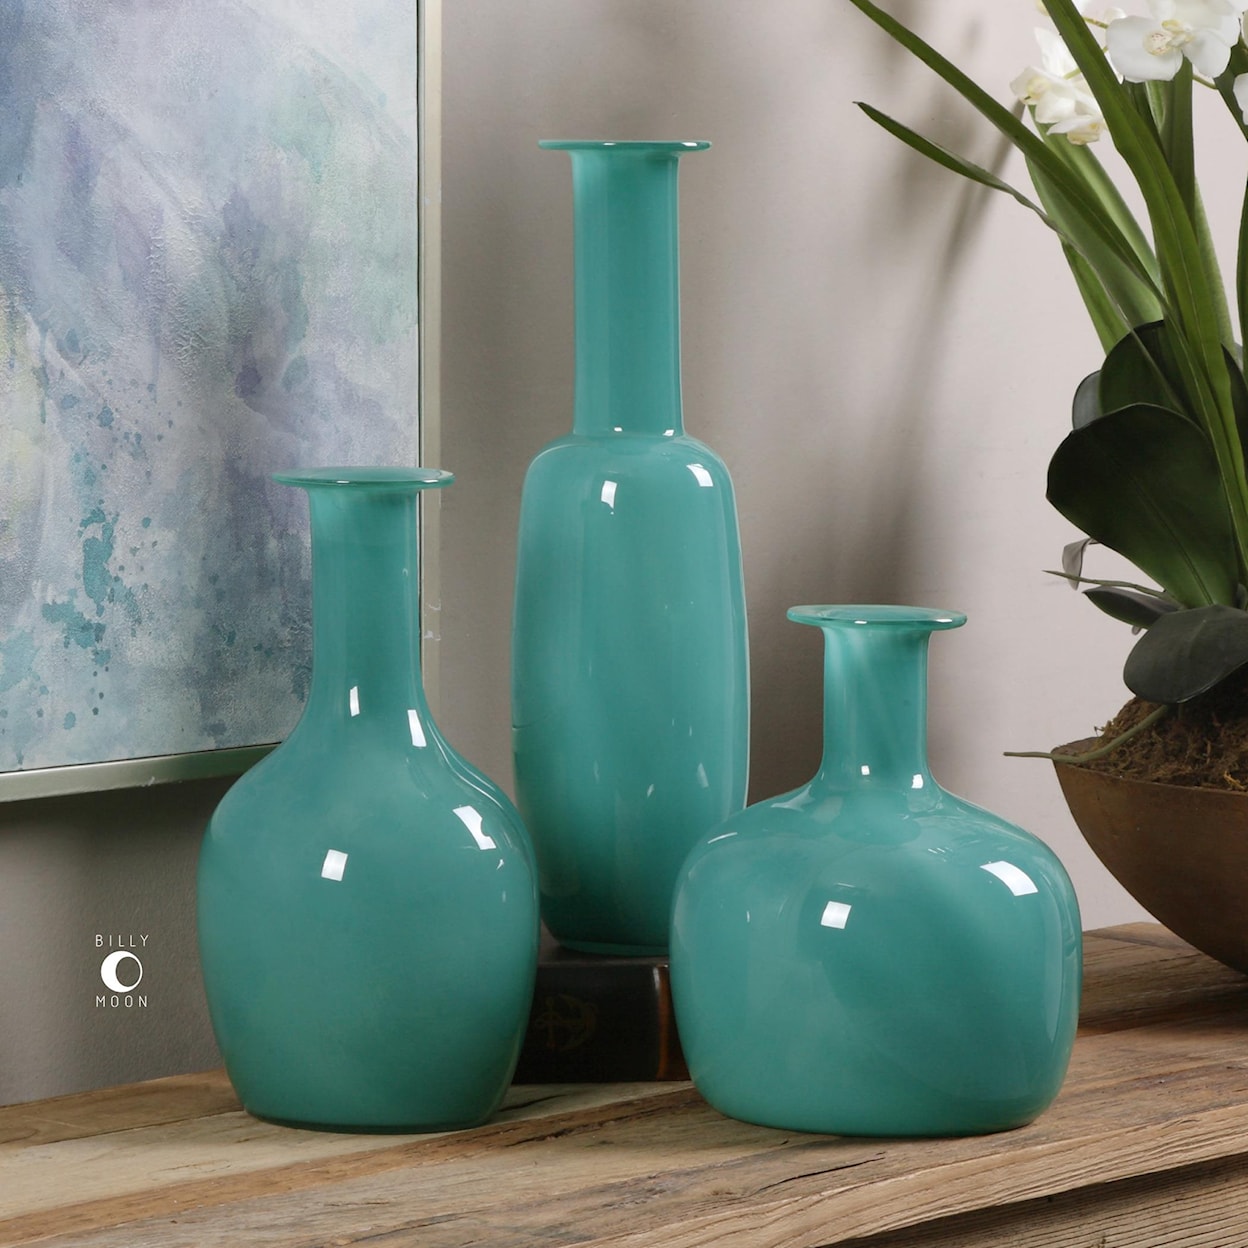 Uttermost Accessories - Vases and Urns Baram Turquoise Vases, S/3